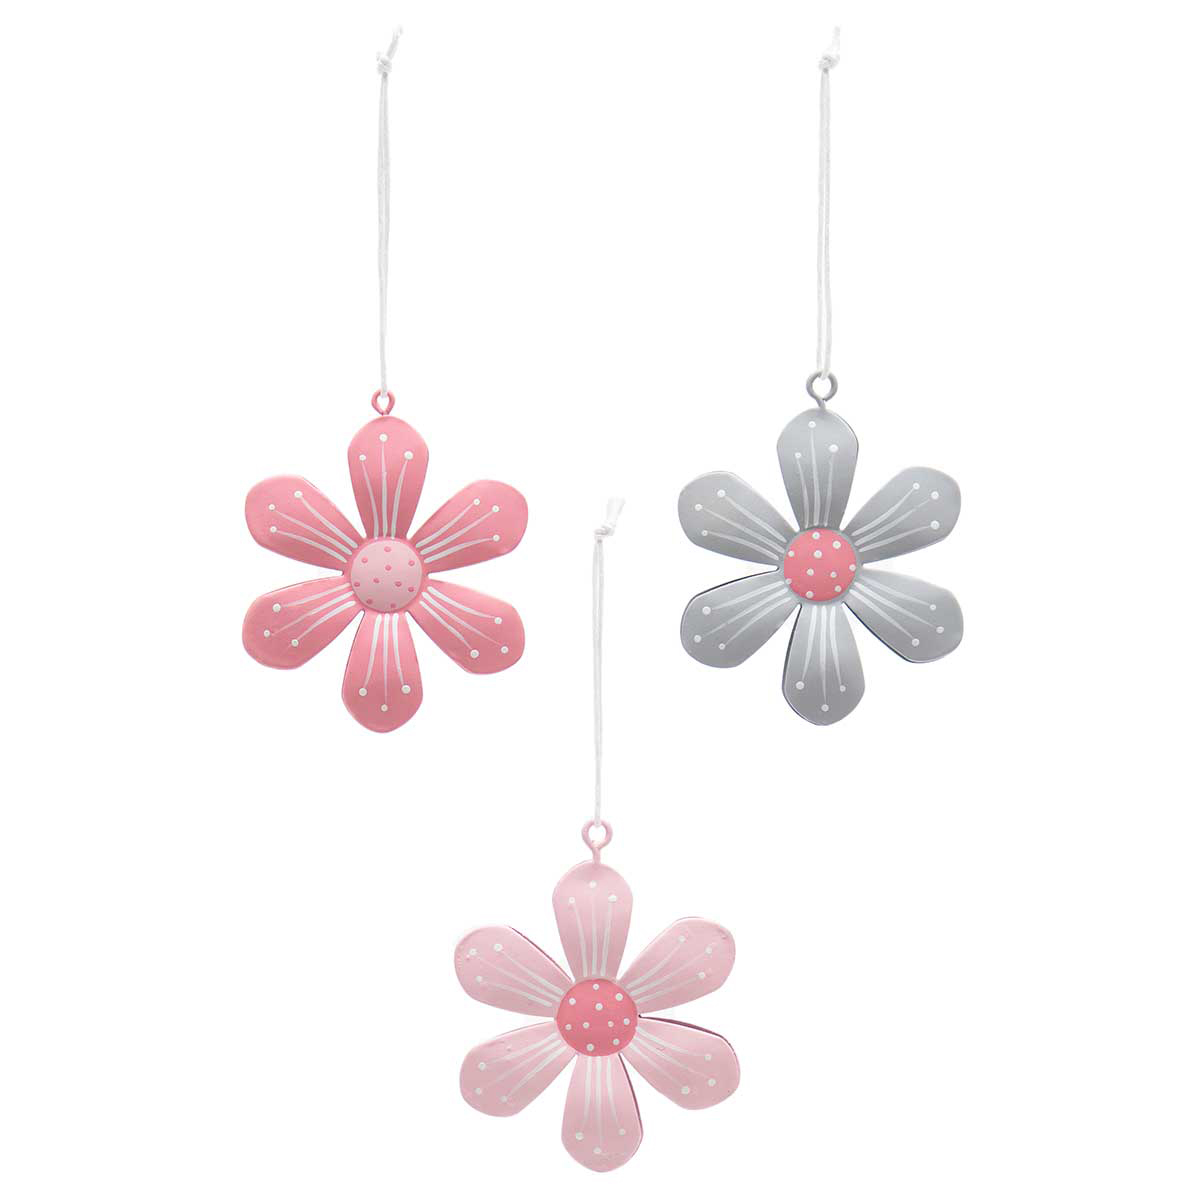 !Flower Metal Ornament with String Hanger